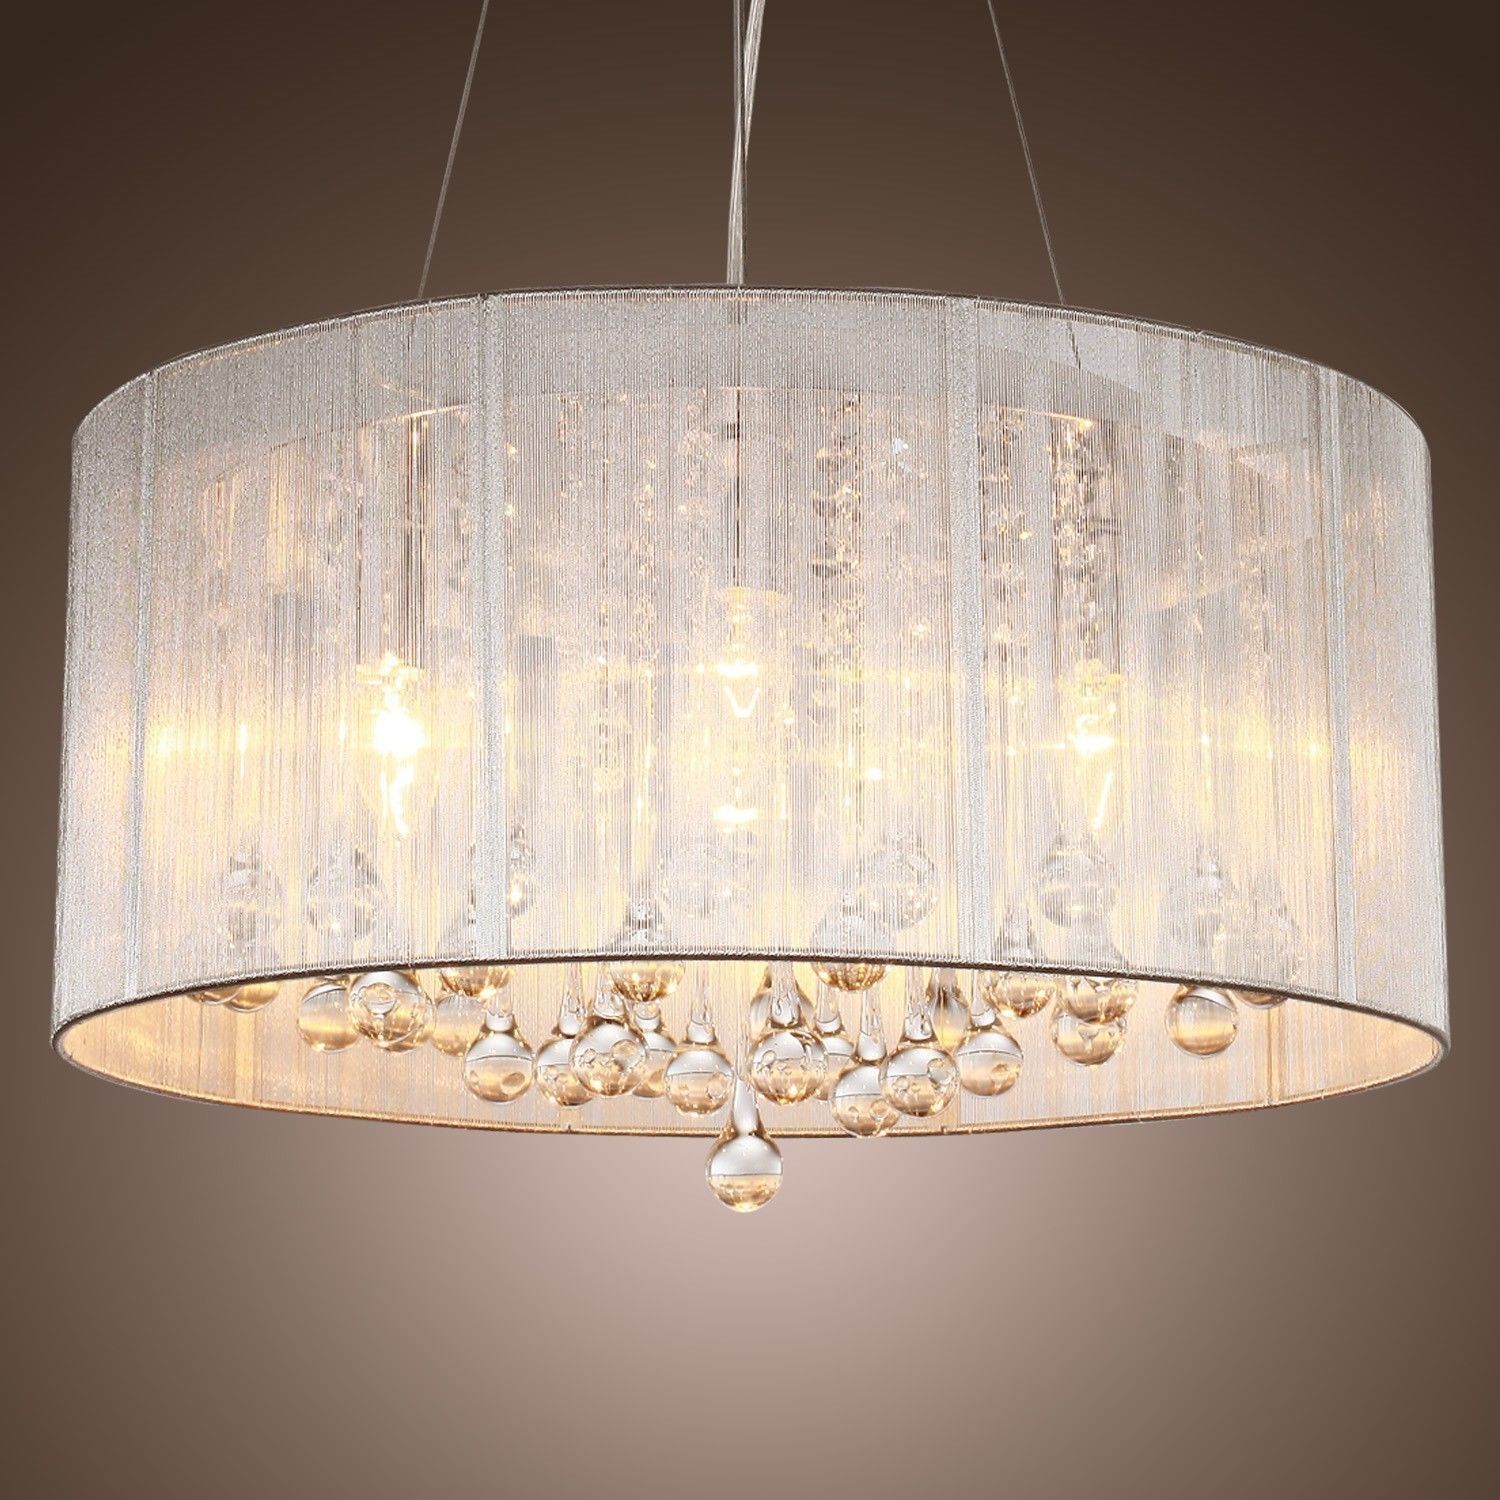 Girly Chandelier Ceiling Fan For Girls Low Ceilings With Light With Modern Chandeliers For Low Ceilings (View 7 of 25)